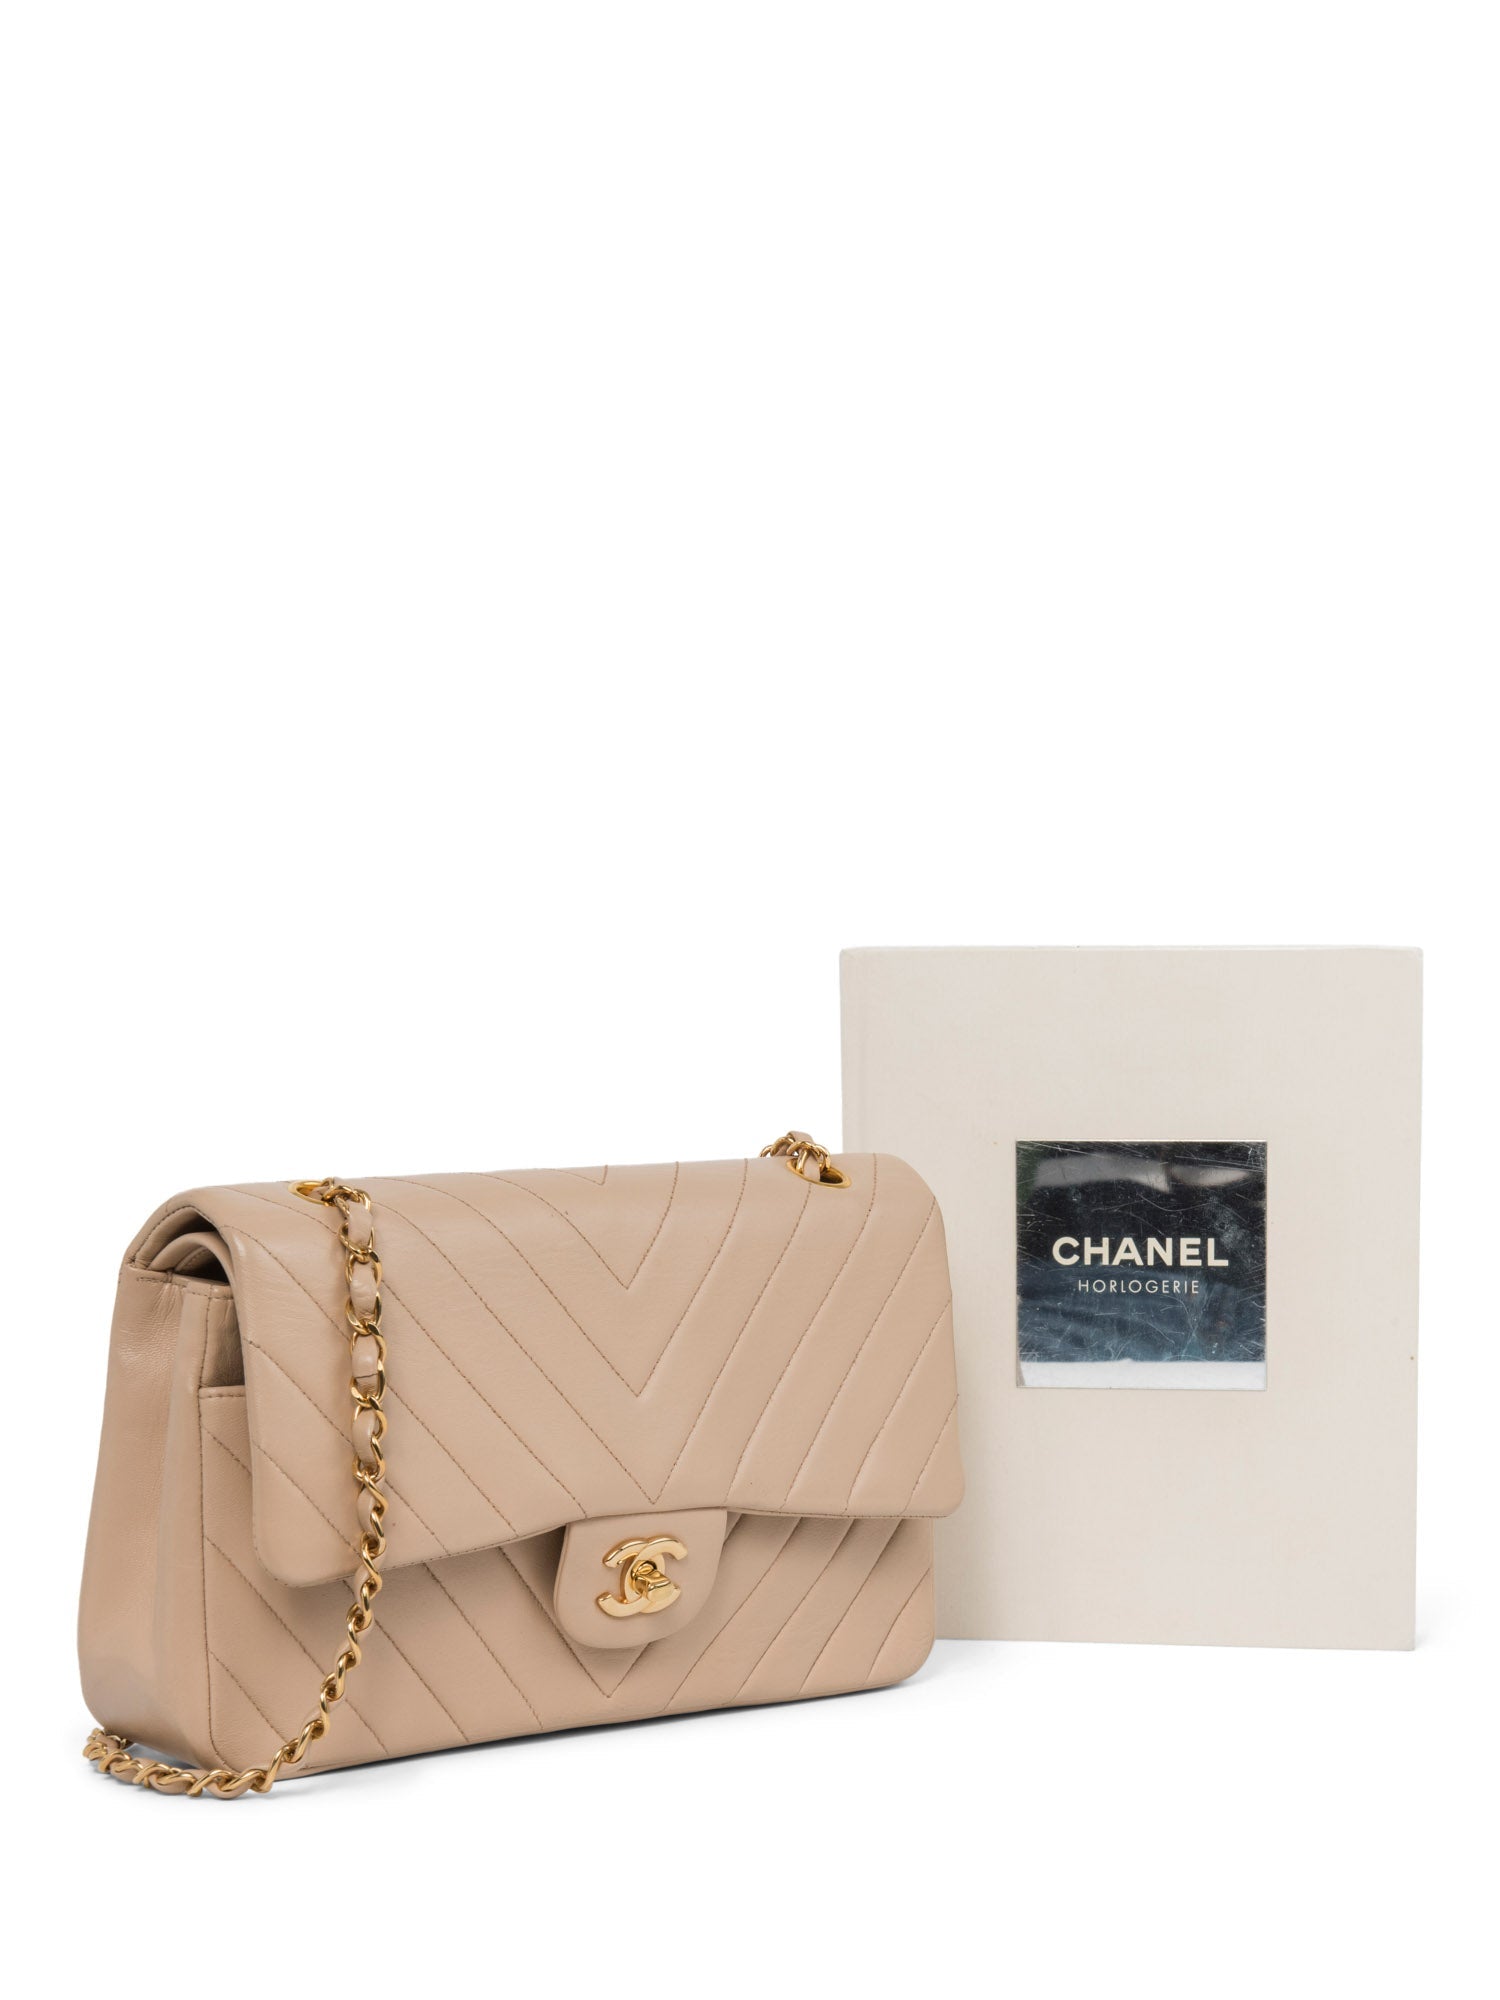 Chanel Bags Prices